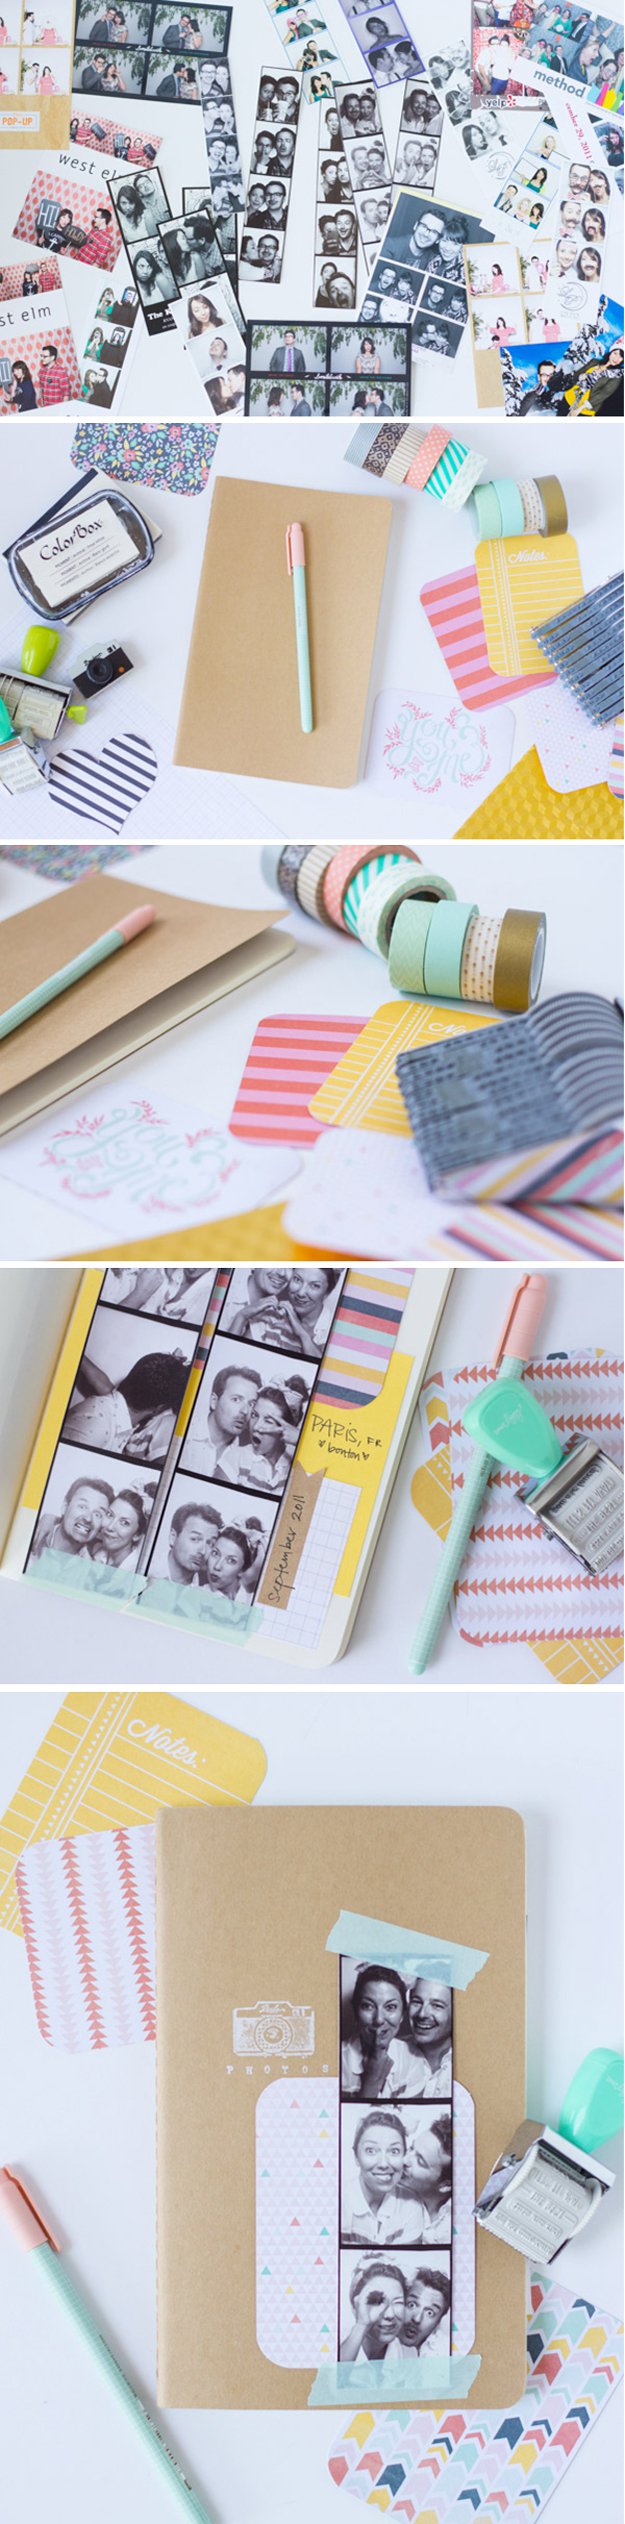 Washi Tape Crafts - DIY Photobooth Strip Scrapbook - Wall Art, Frames, Cards, Pencils, Room Decor and DIY Gifts, Back To School Supplies - Creative, Fun Craft Ideas for Teens, Tweens and Teenagers - Step by Step Tutorials and Instructions #washitape #crafts #cheapcrafts #teencrafts